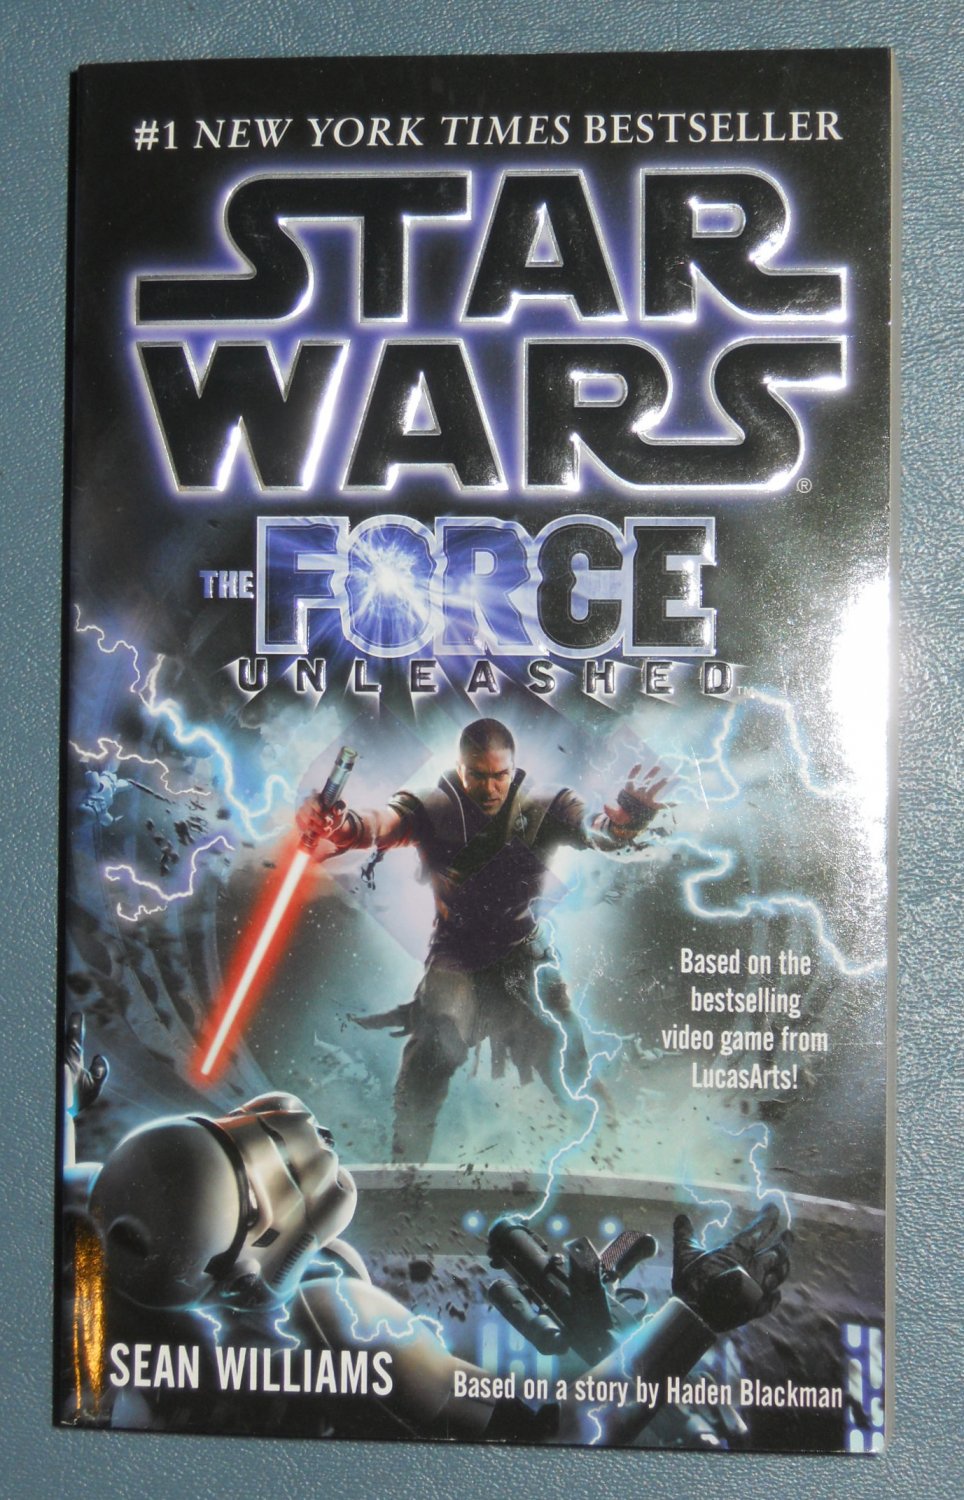 Star Wars The Force Unleashed (Official Prima Guide) PDF